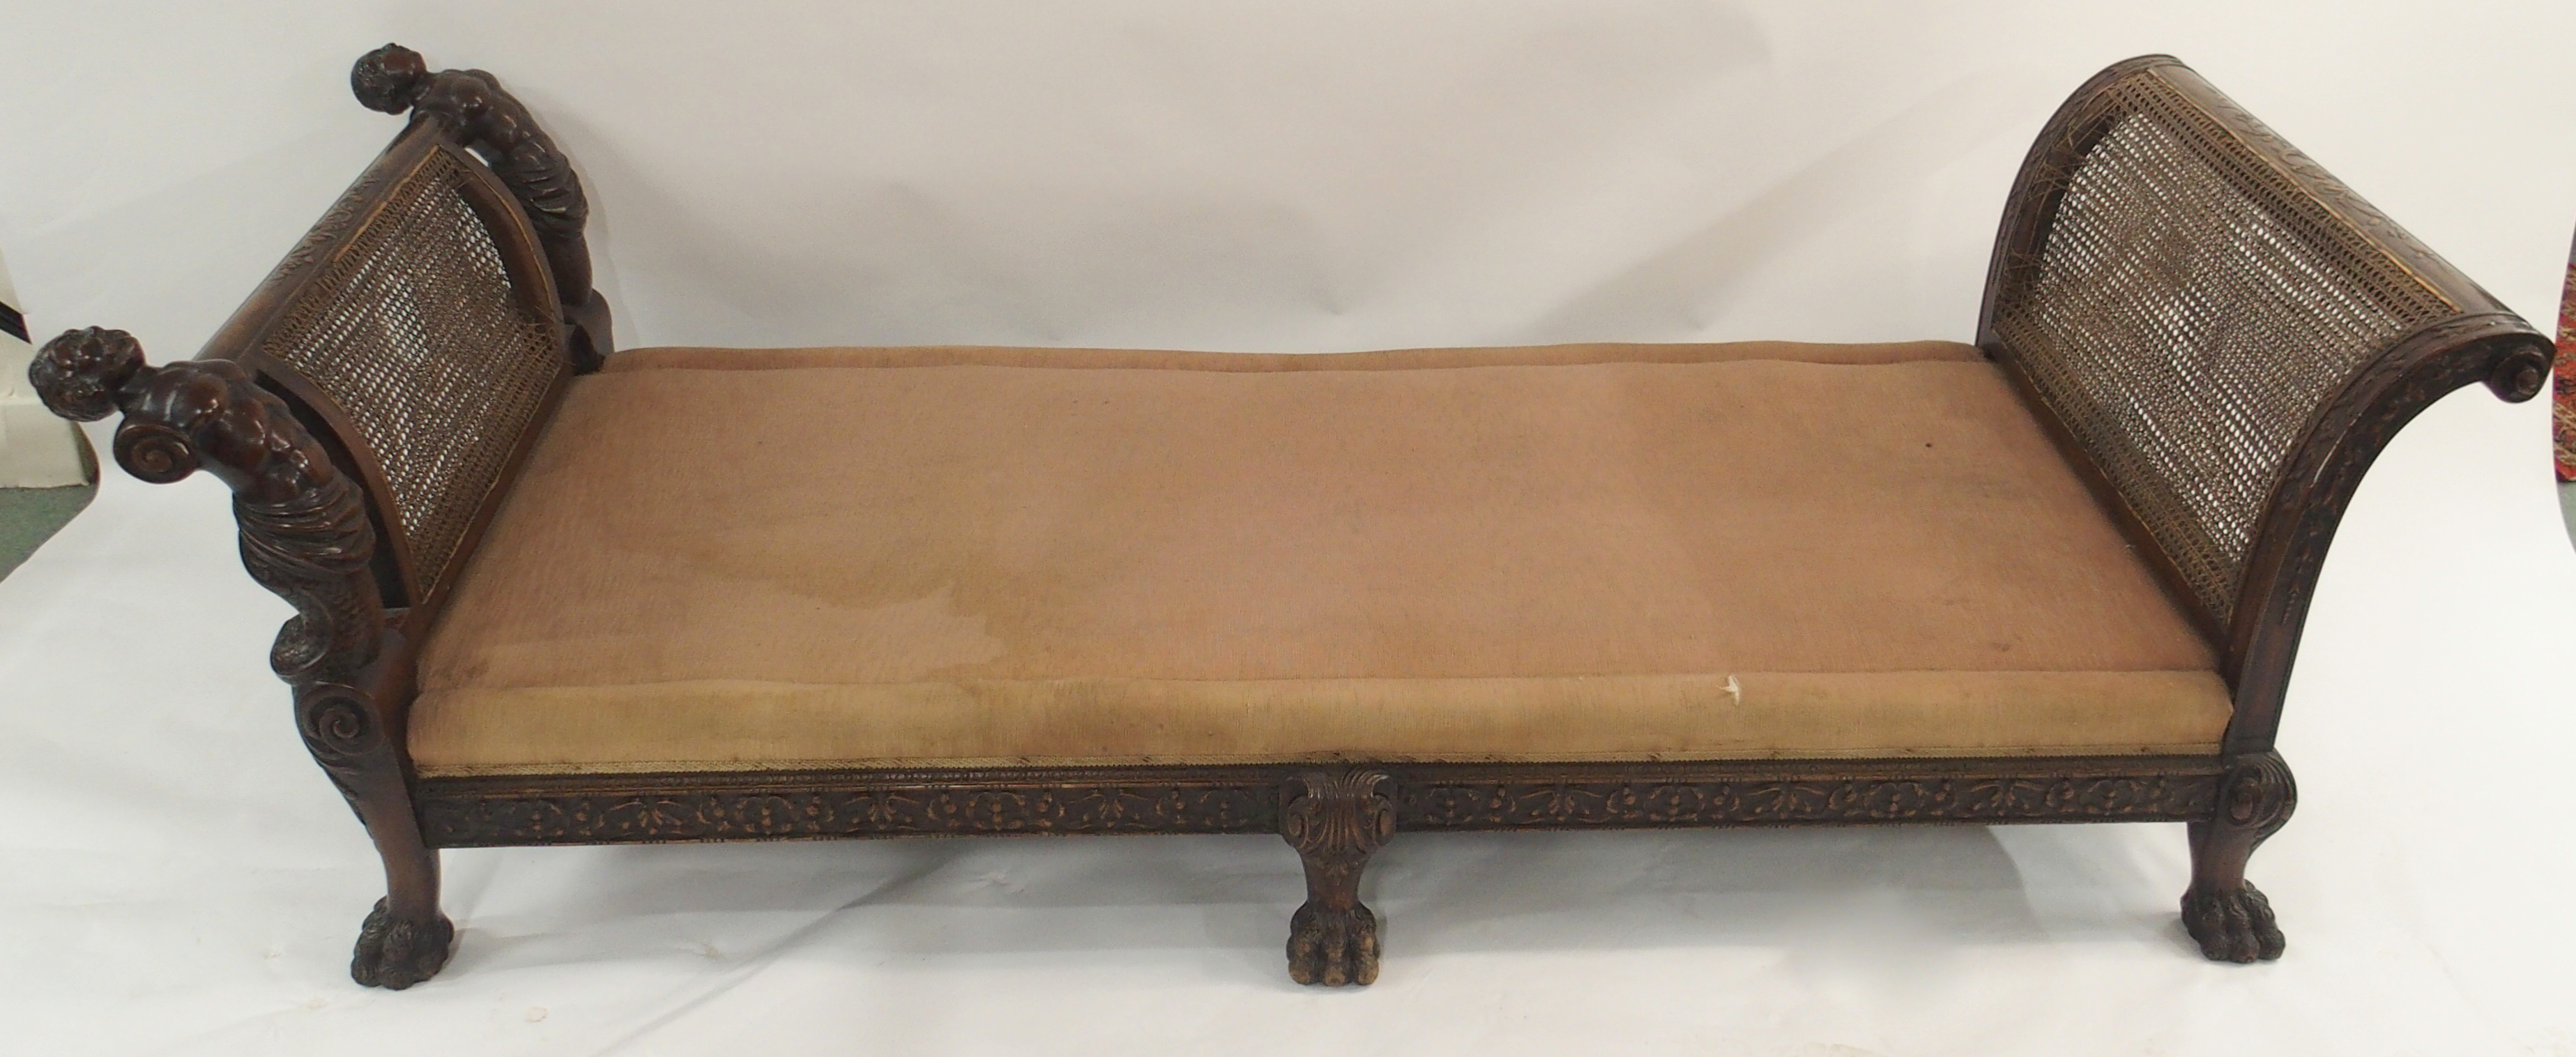 A WALNUT AND CANE FRAMED DAY BED the silk upholstered seat flanked by carved Mer figures on acanthus - Image 12 of 14